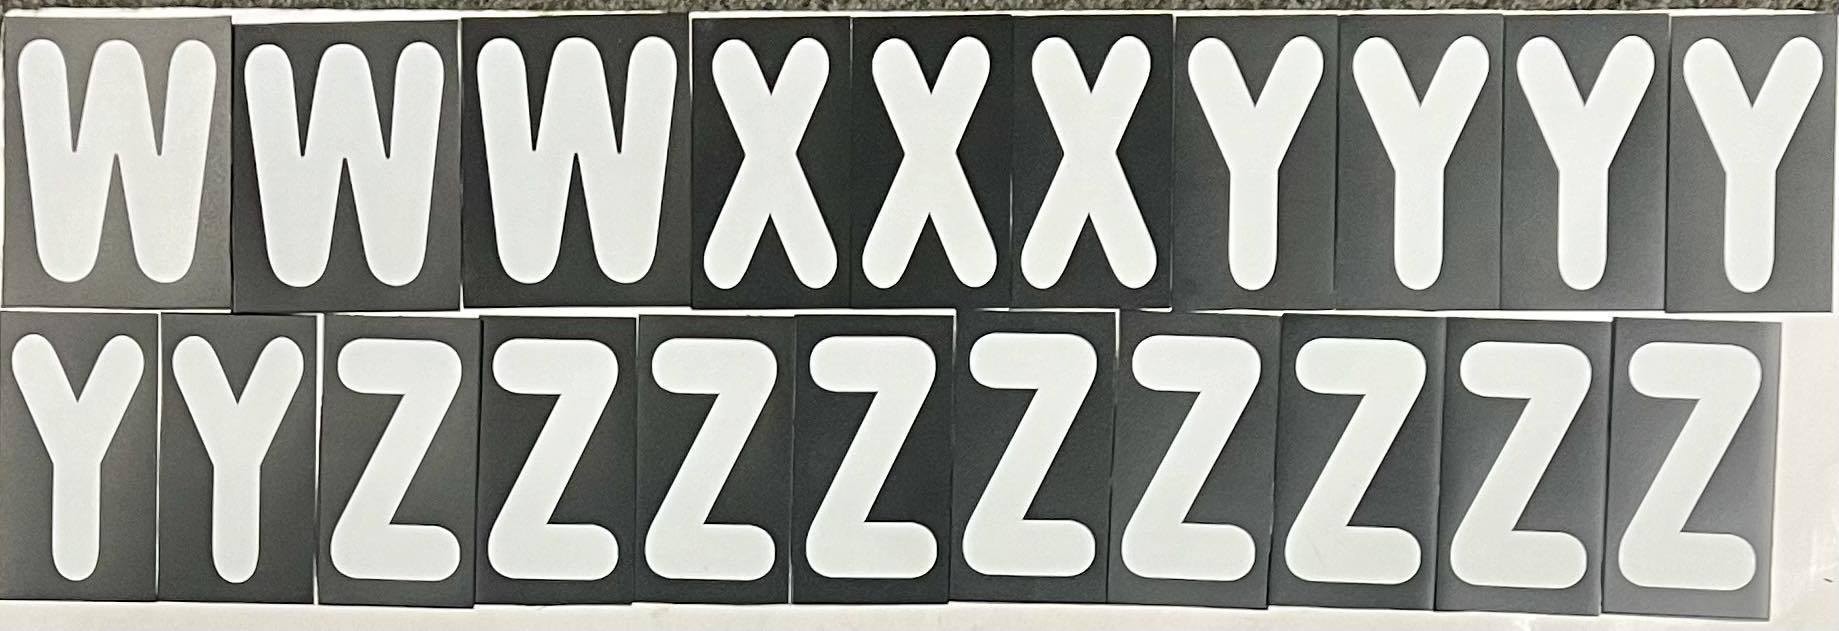 Sign Trax Message Board Letter Set - Missing Some Symbols & Numbers